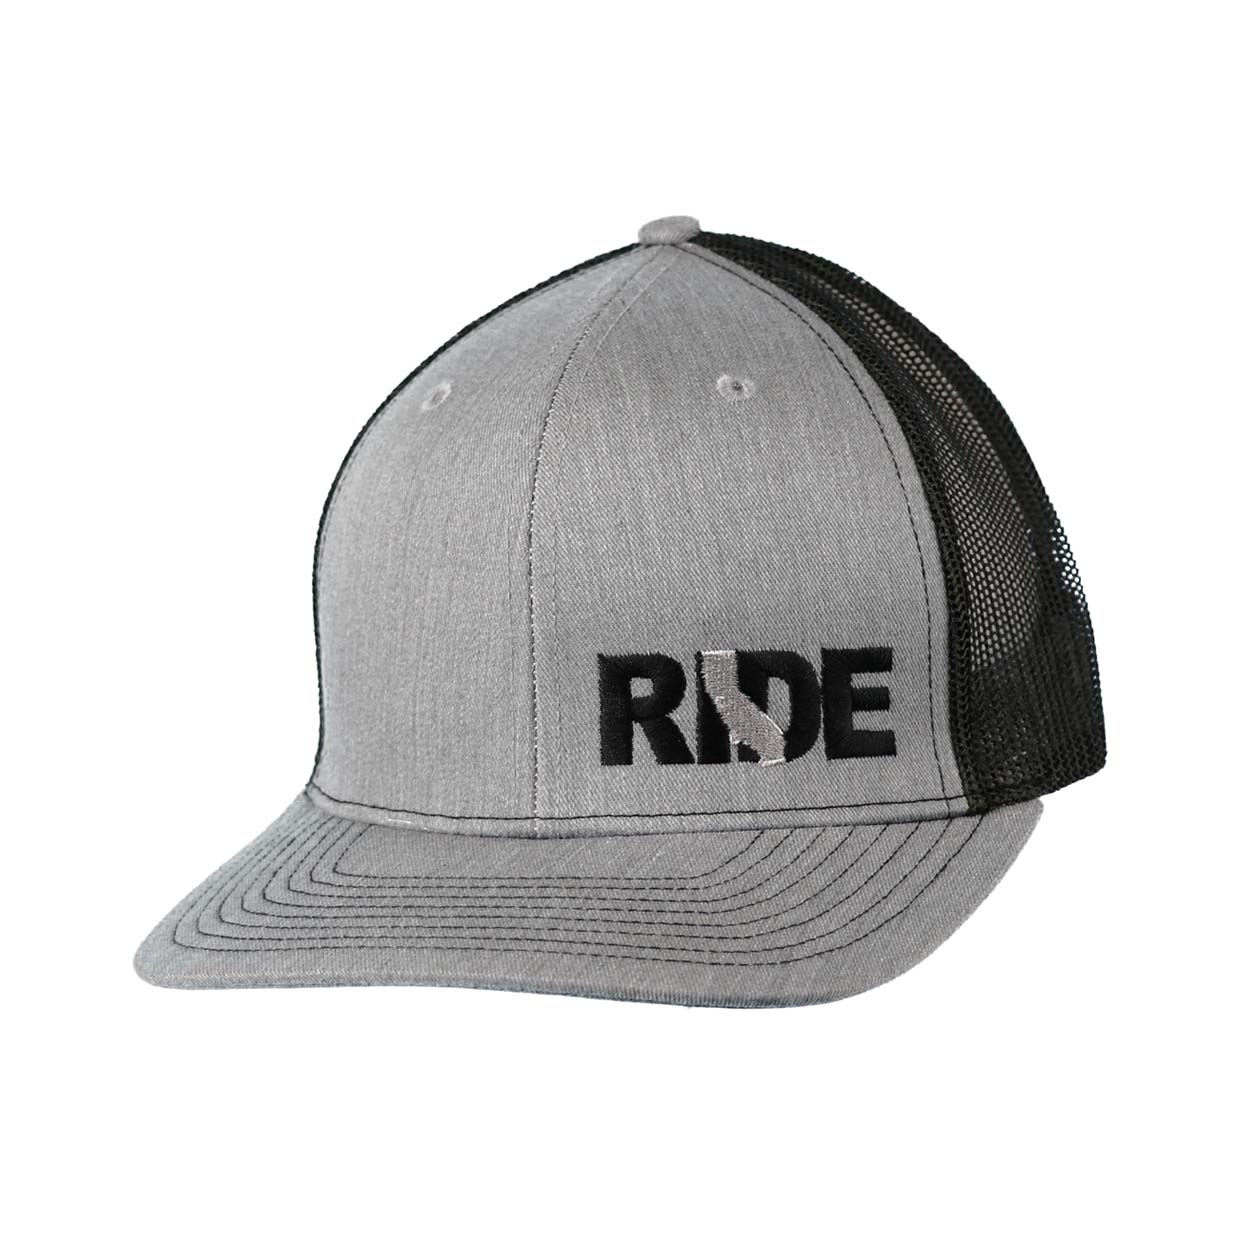 Ride California Night Out Embroidered Snapback Trucker Hat Heather Gray/Black